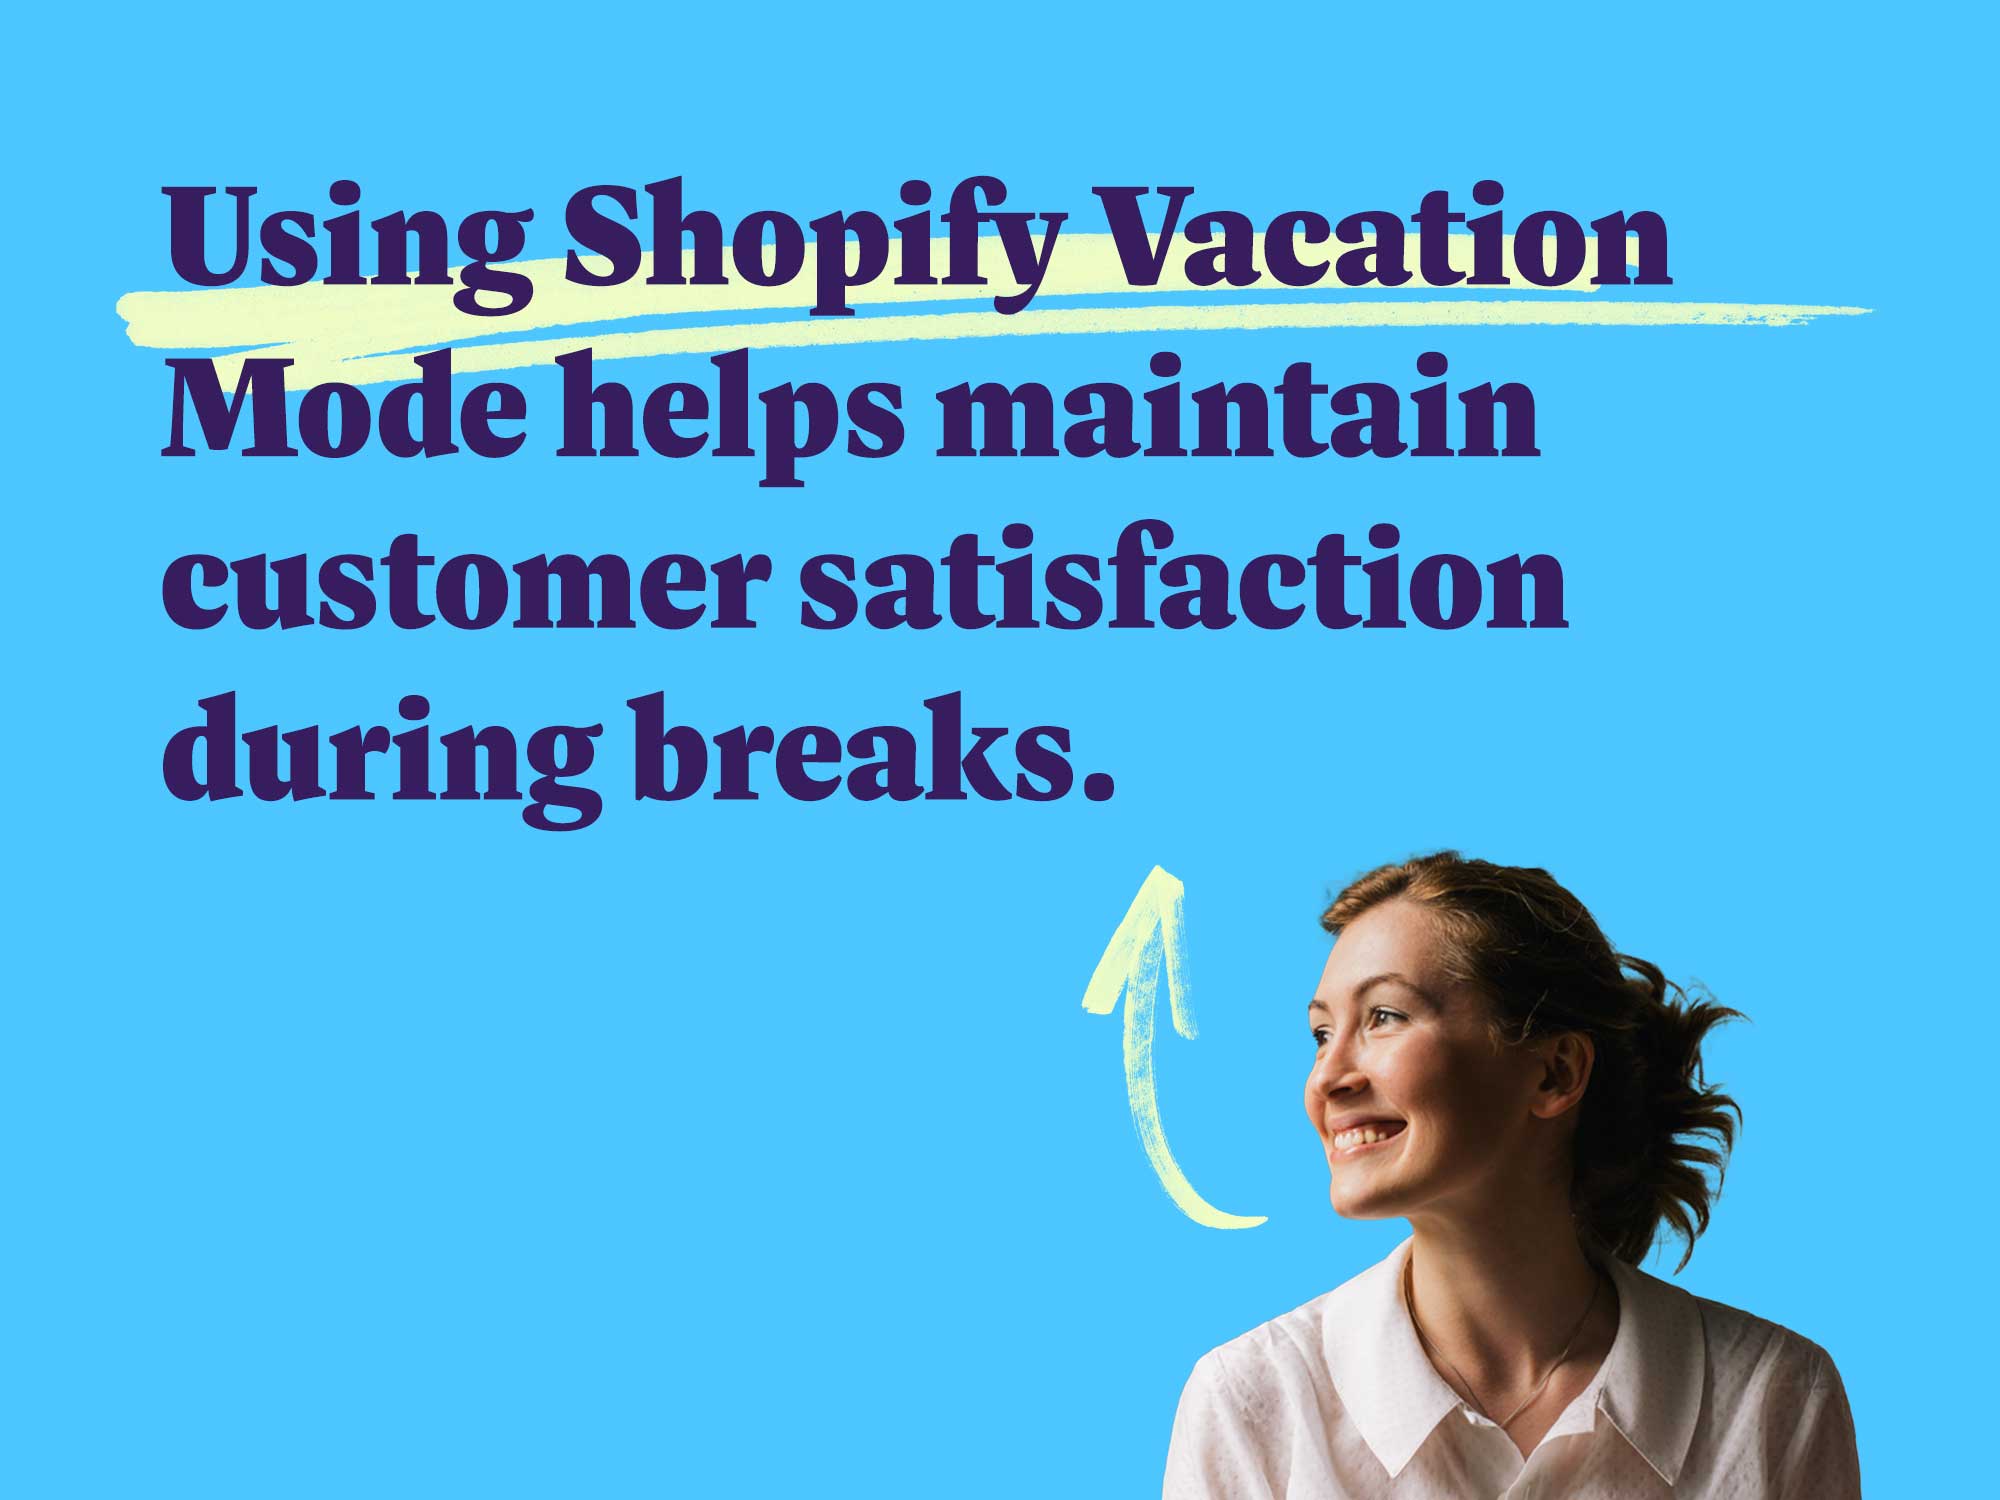 Using Shopify Vacation Mode helps maintain customer satisfaction during breaks.